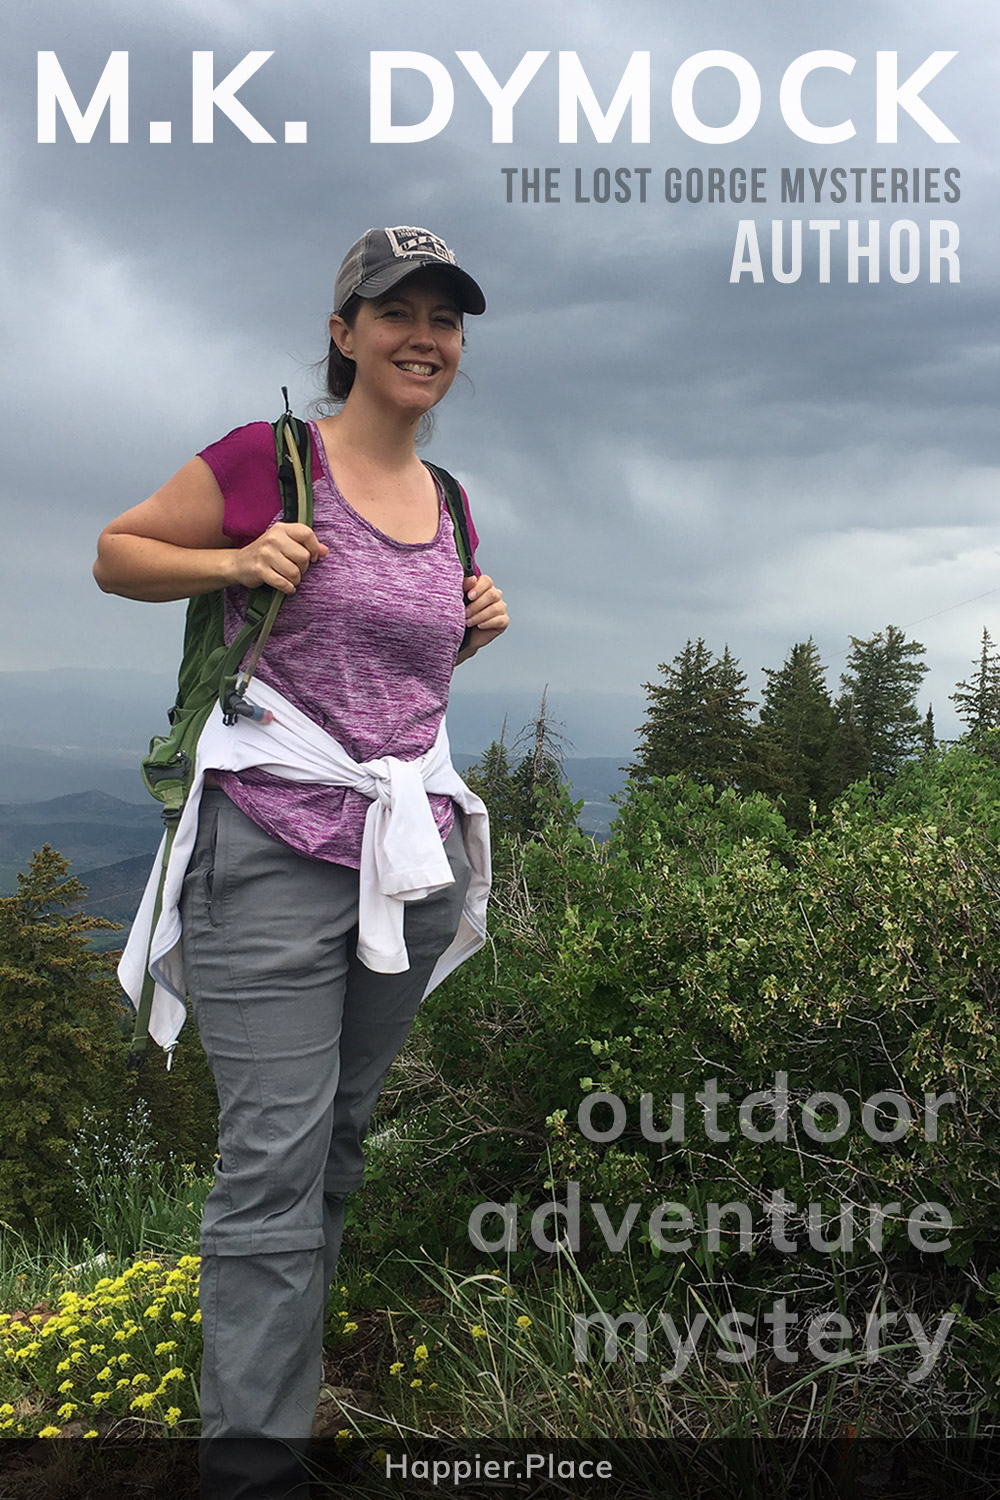 Interview with outdoor adventure mystery author M.K. Dymock, creator of the Lost Gorge Mysteries.